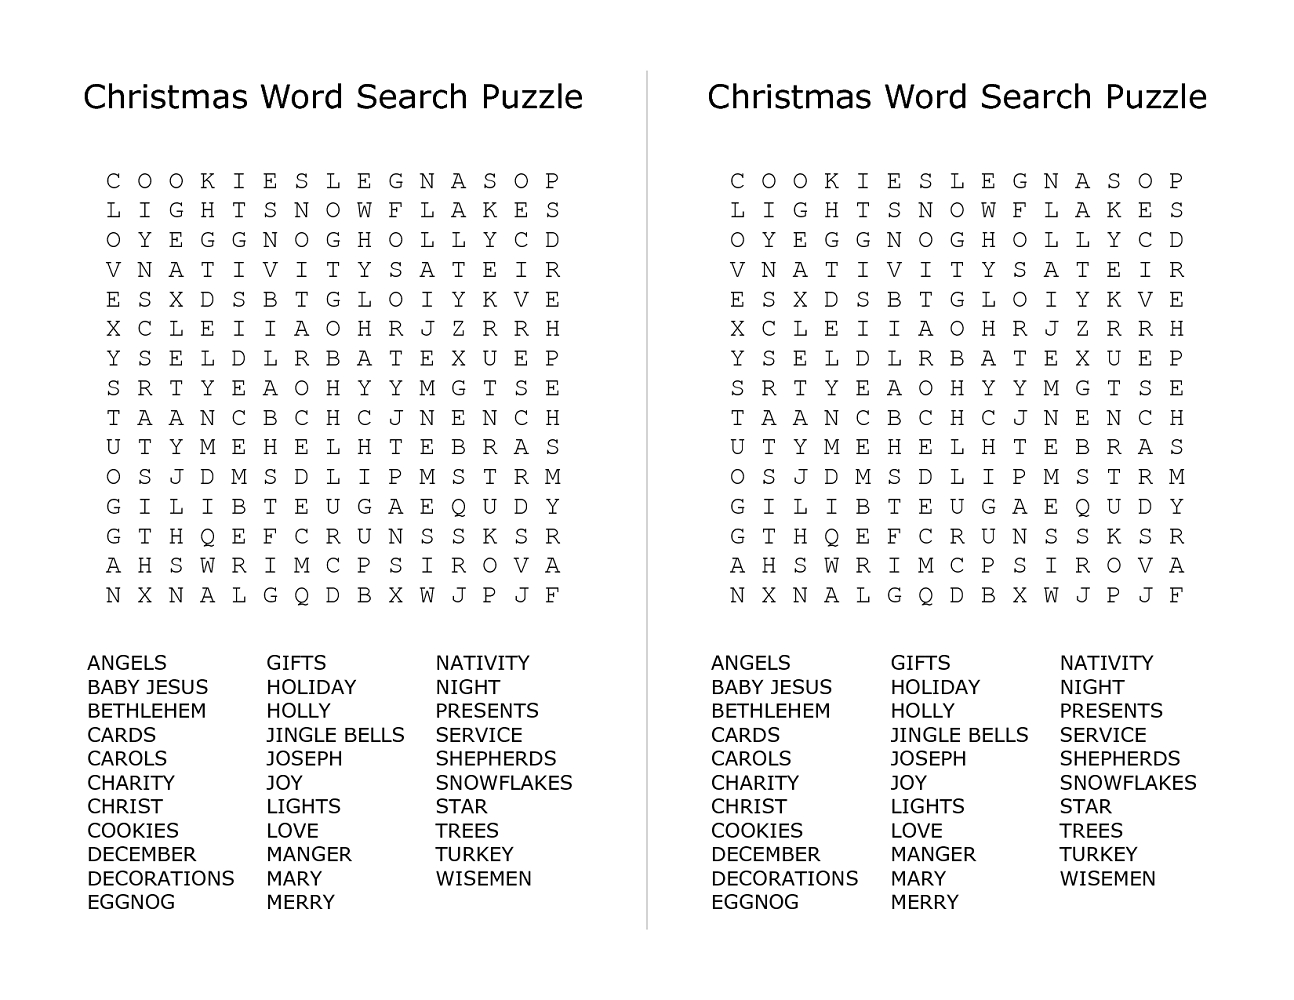 25 Unique Christmas Word Search Ideas On Pinterest Printable - Free Printable Christmas Puzzles Word Searches